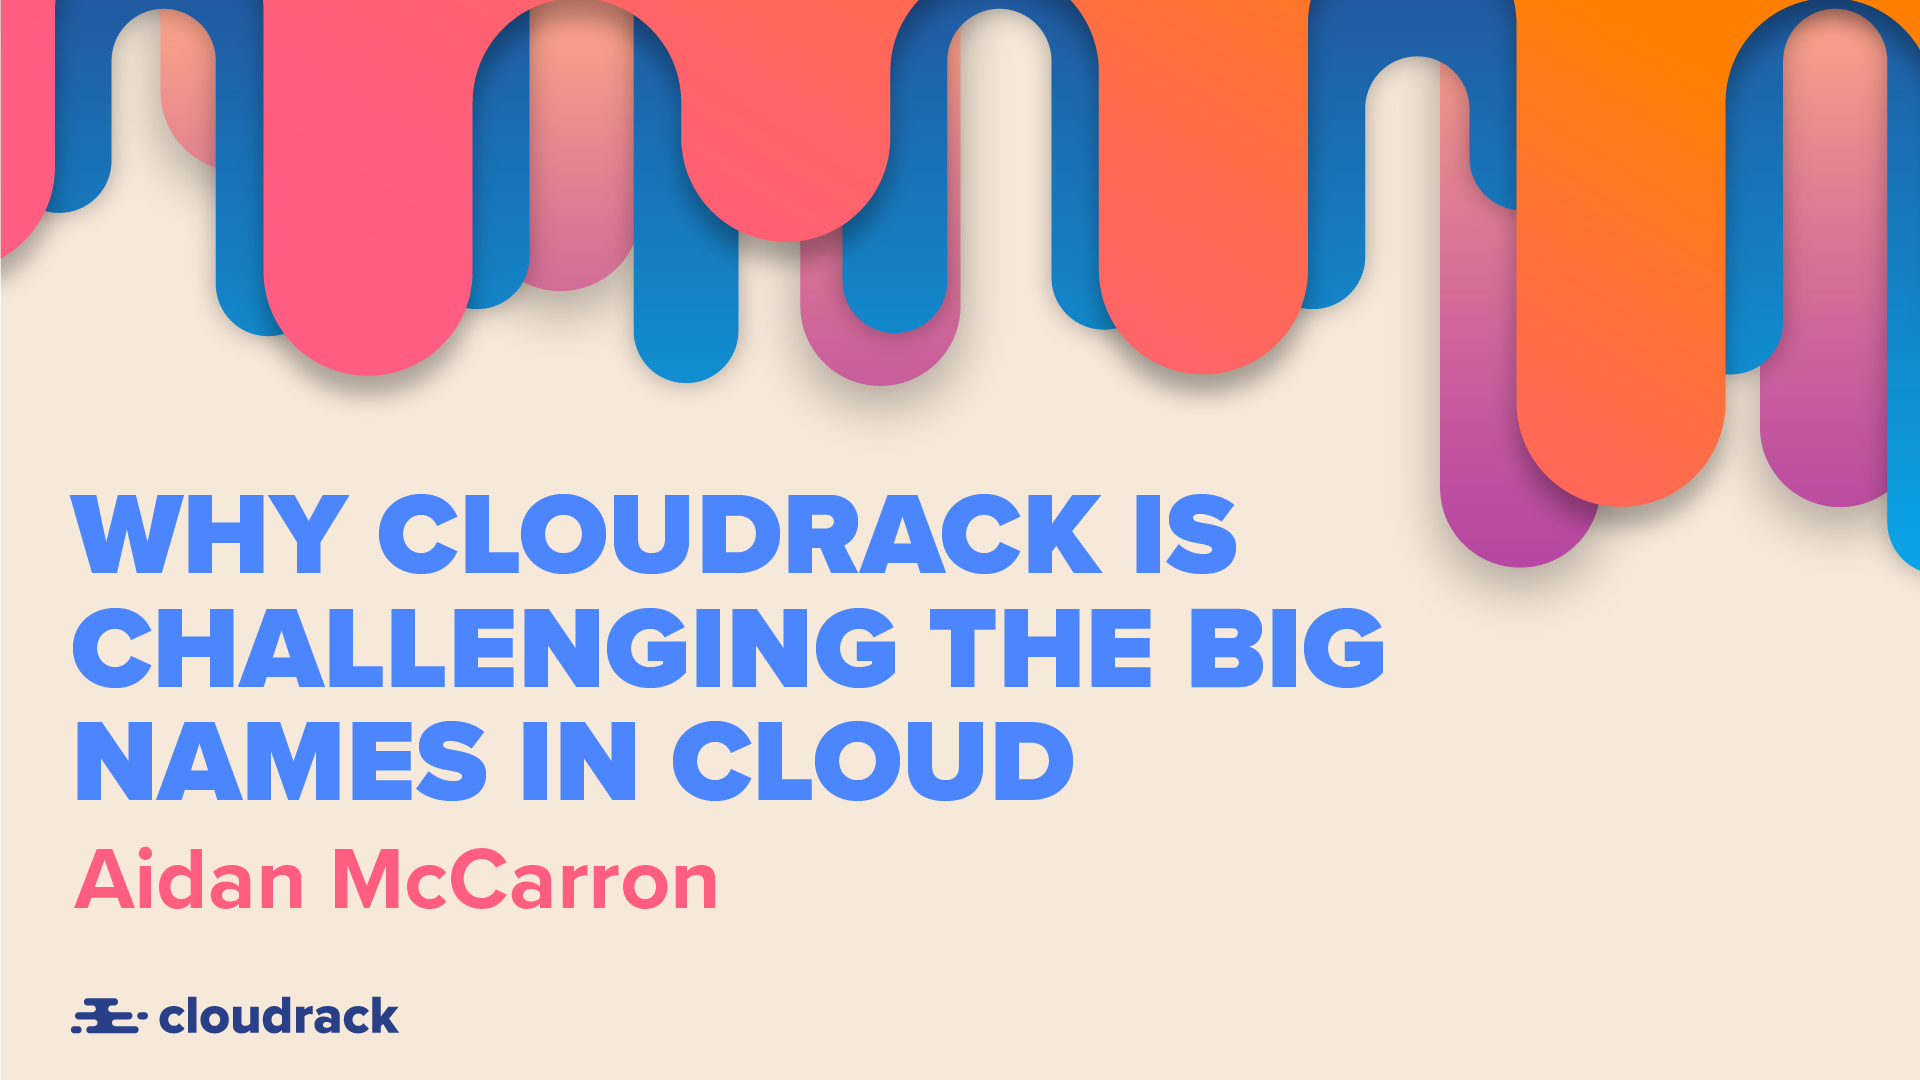 You are currently viewing Why Cloudrack is challenging the big names in cloud: Aidan McCarron